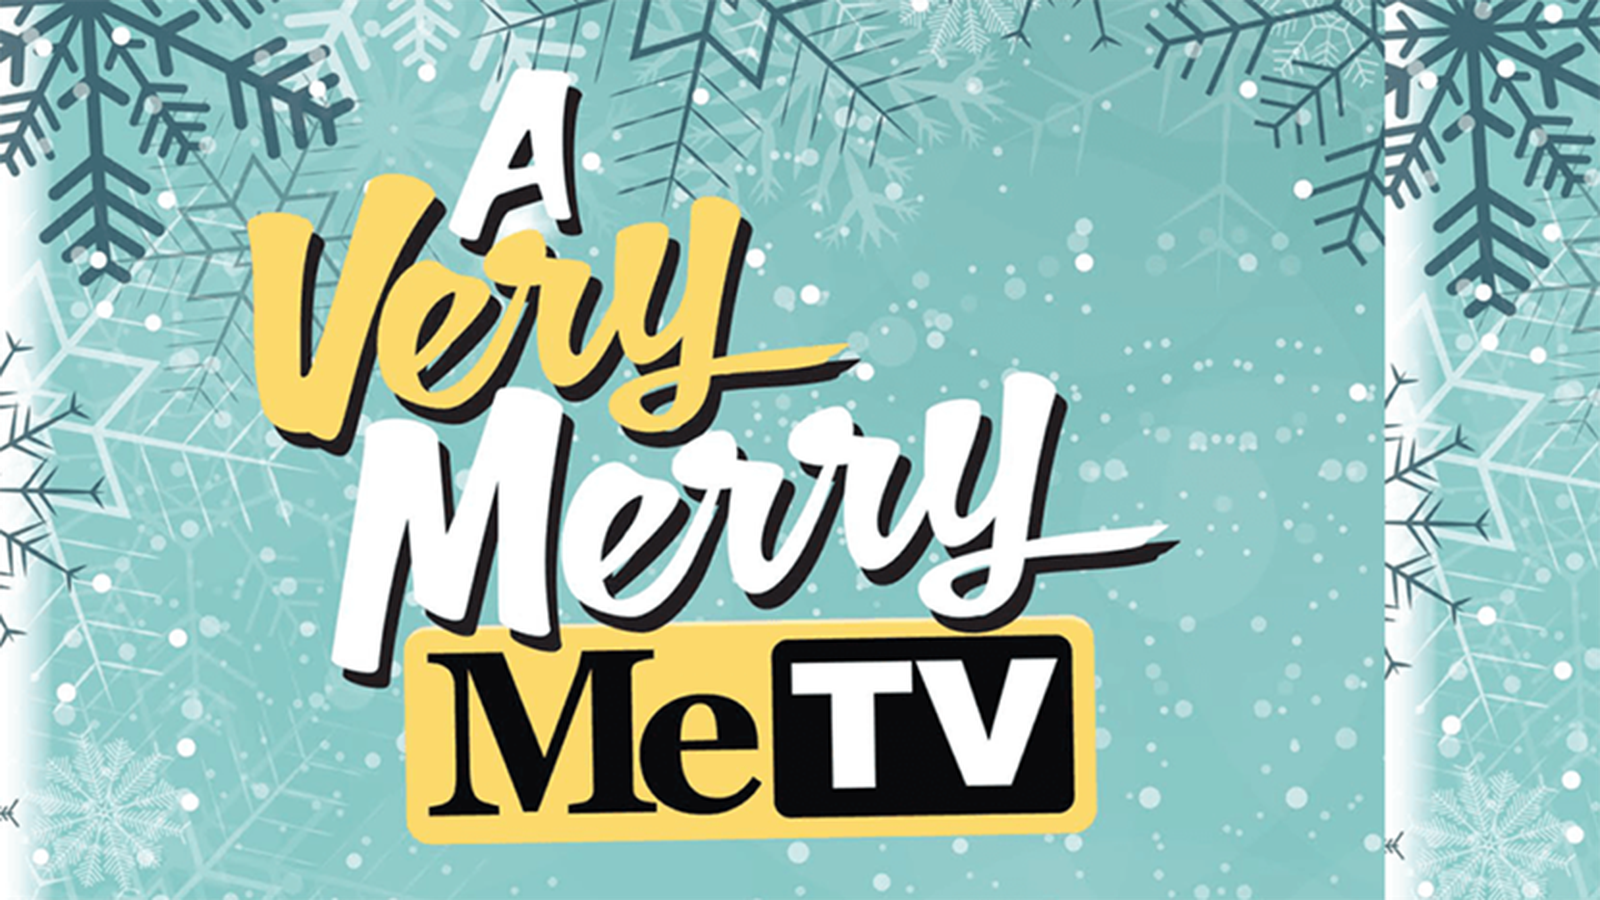 A Very Merry MeTV returns to MeTV WHIO Classic Television WHIO TV 7